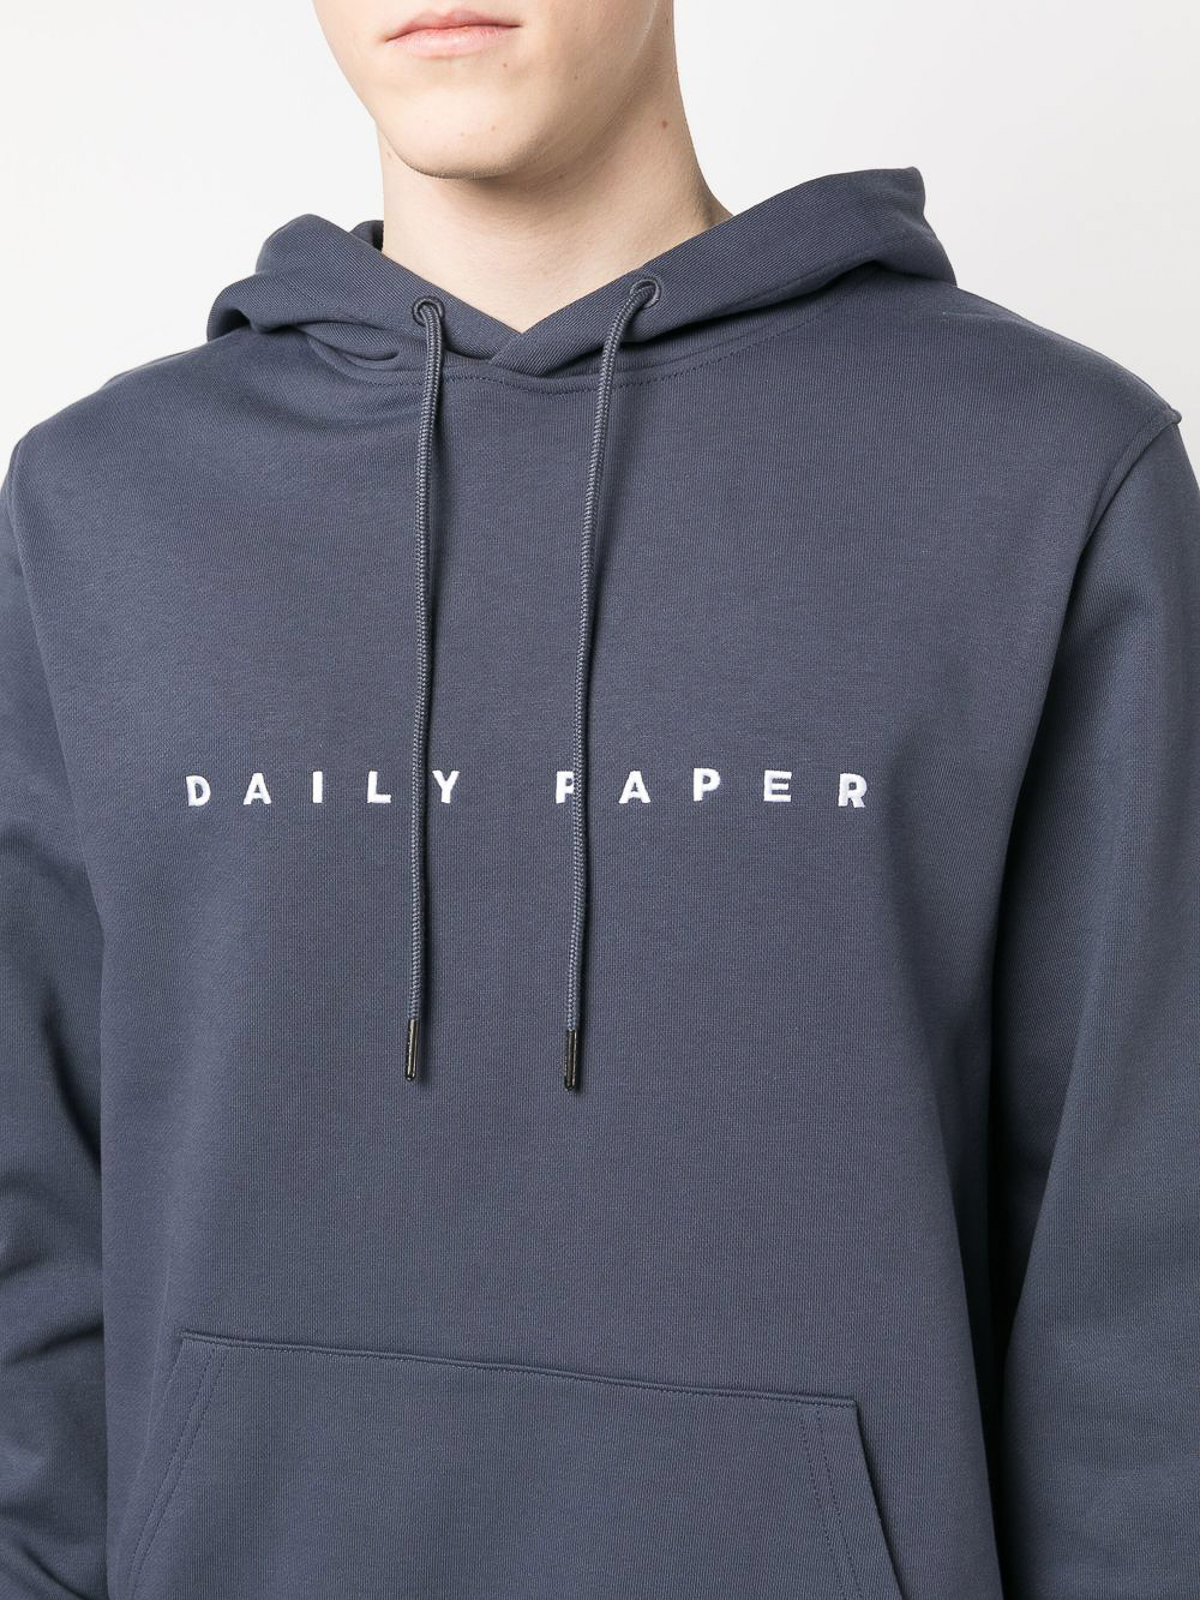 Shop DAILY PAPER Online